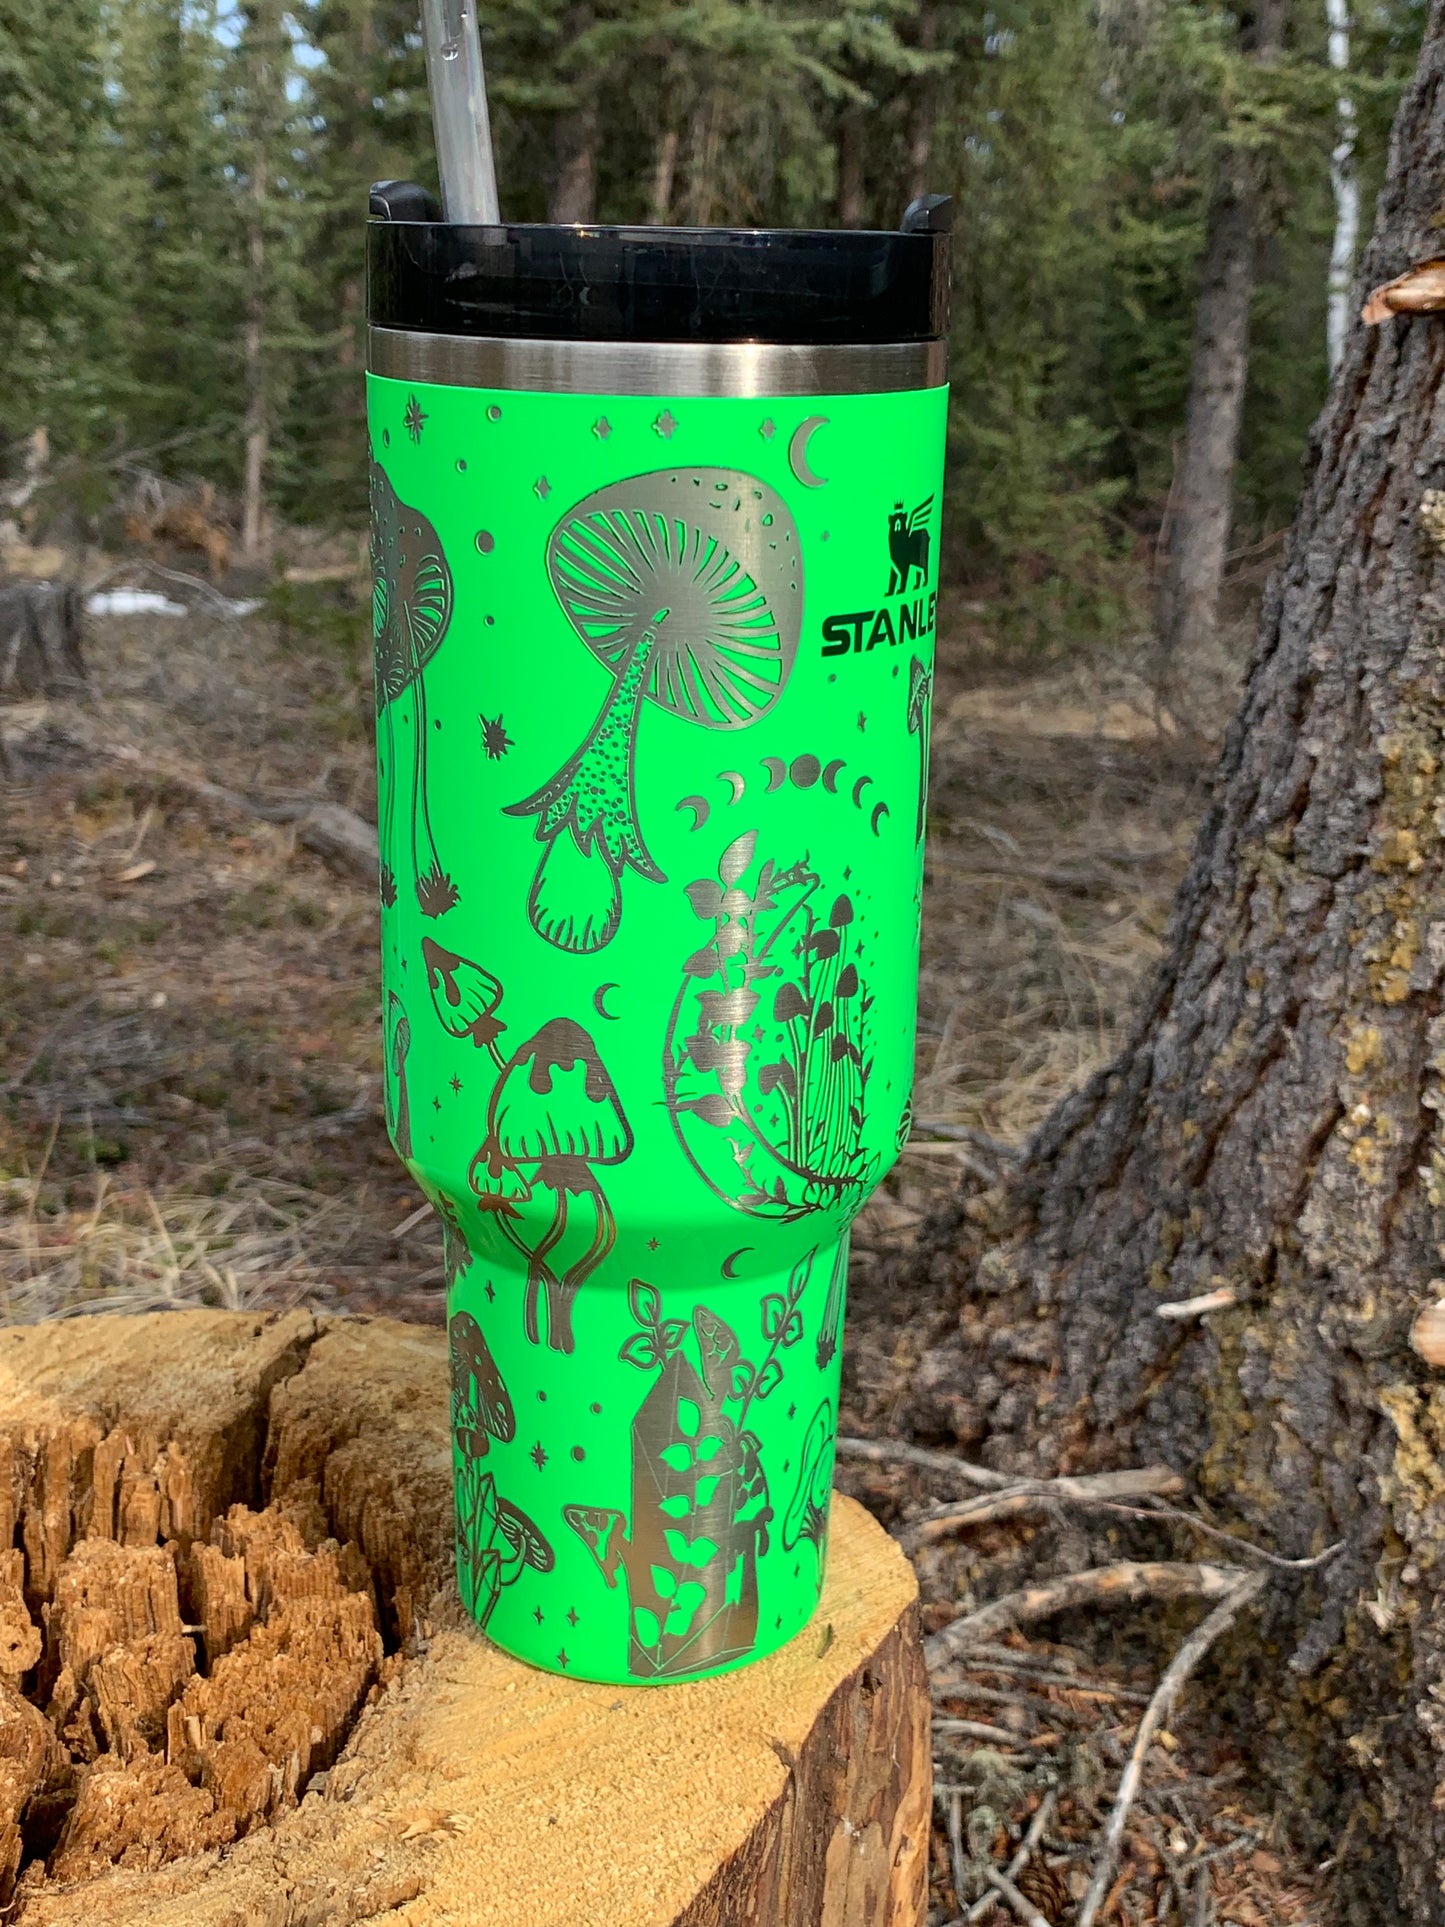 Stanley 40.oz Quencher. Engraved Tumbler, Mushrooms.